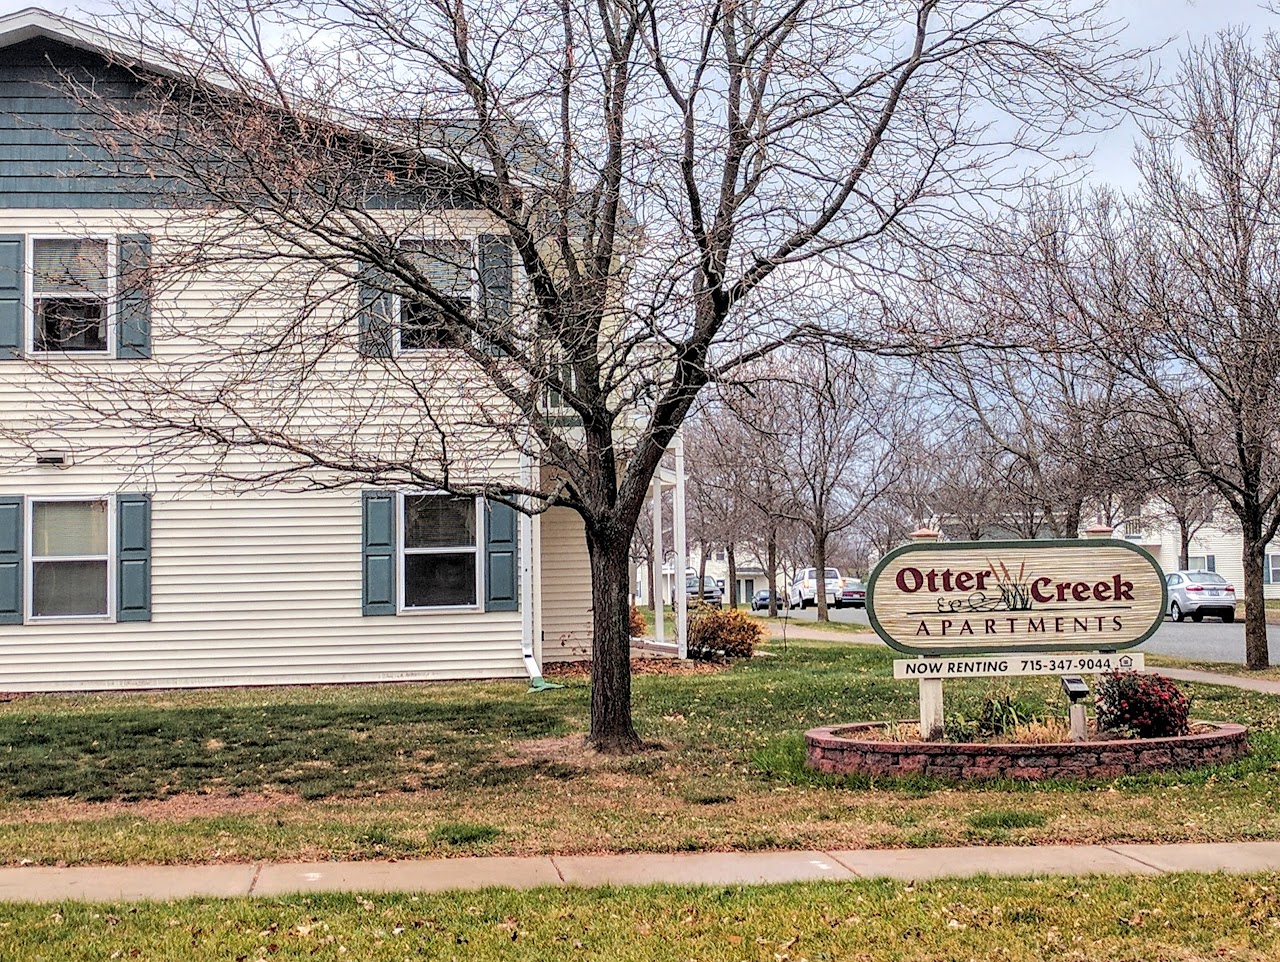 Photo of OTTER CREEK. Affordable housing located at 5726 OTTER CREEK CT EAU CLAIRE, WI 54701